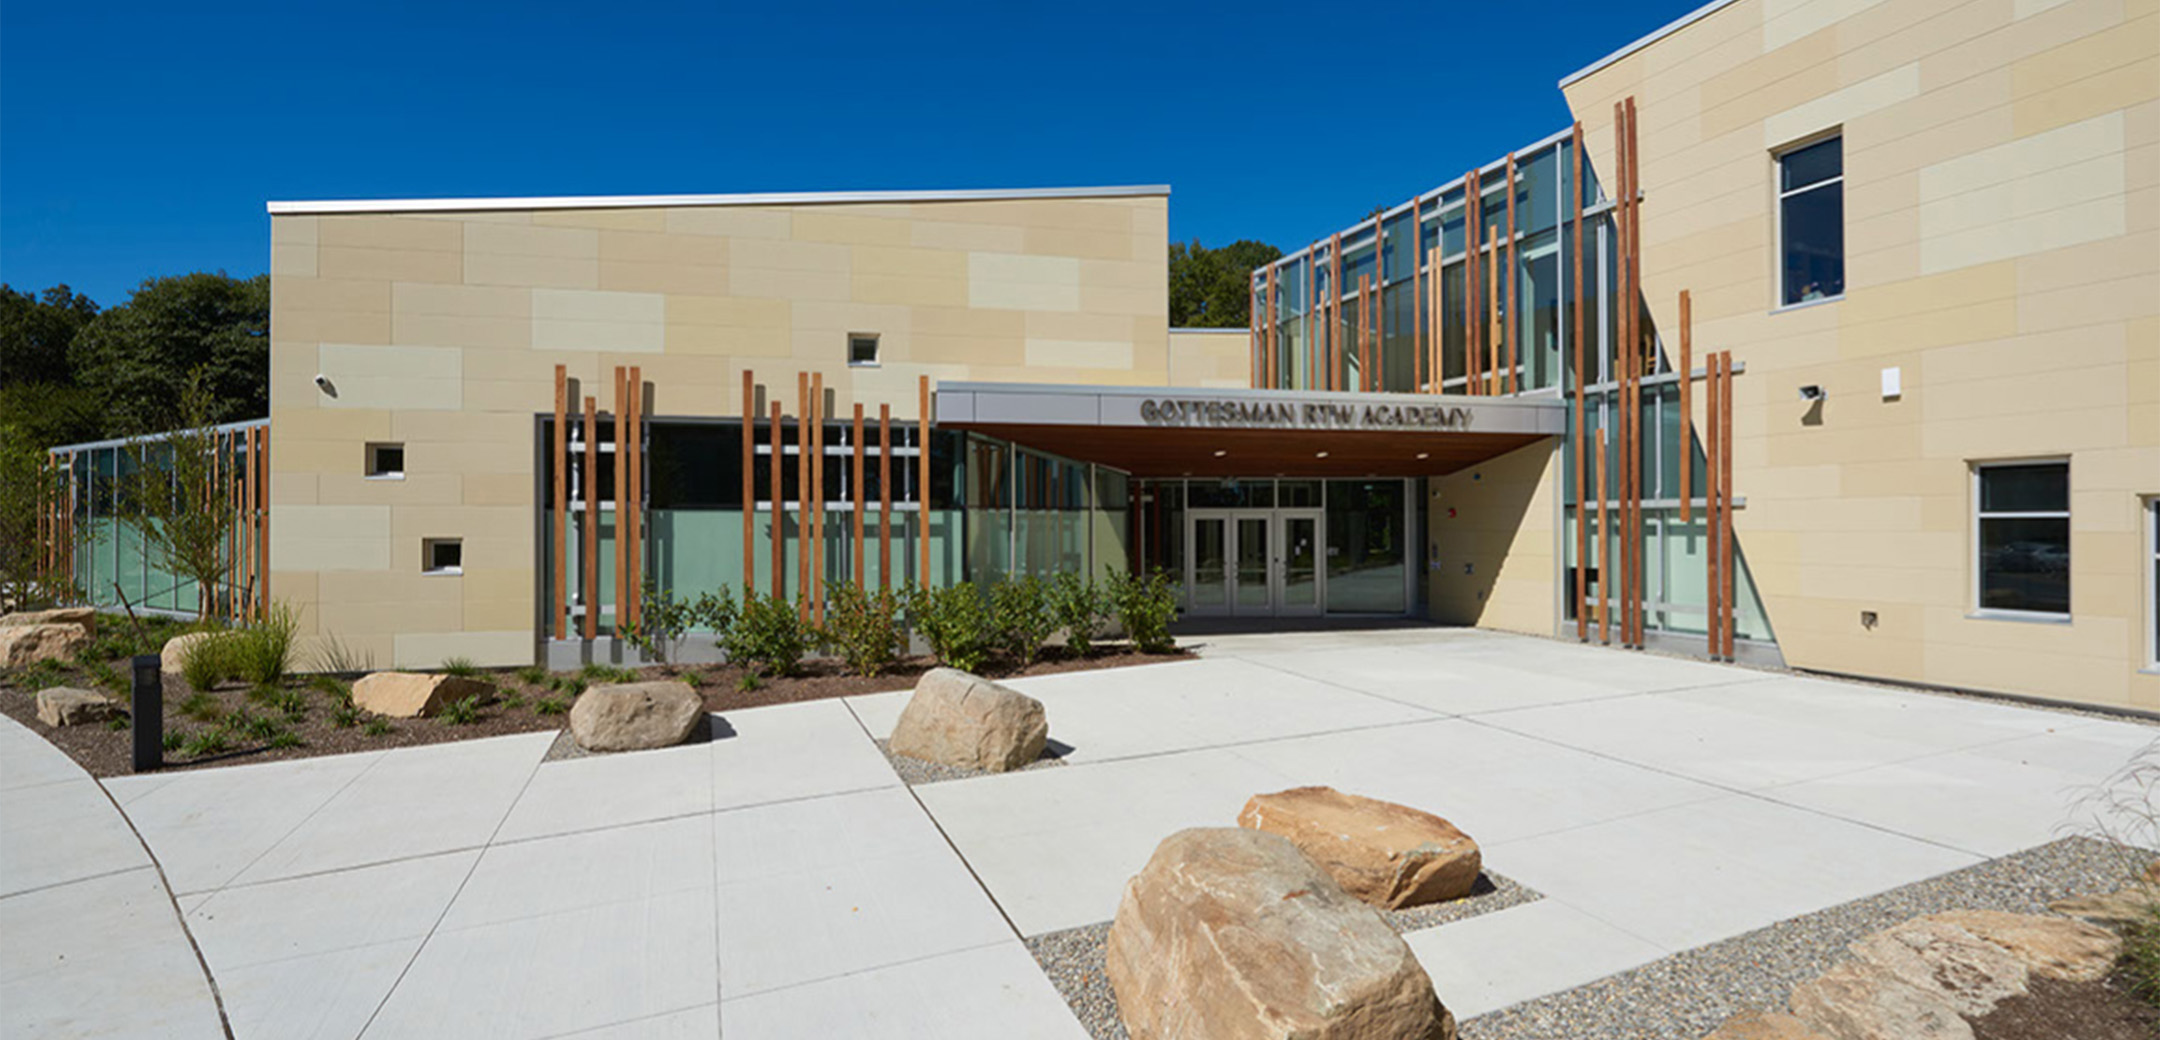 A close up view of the Gottesman RTW Academy building's front entrance with stone décor and wood board glass accents.